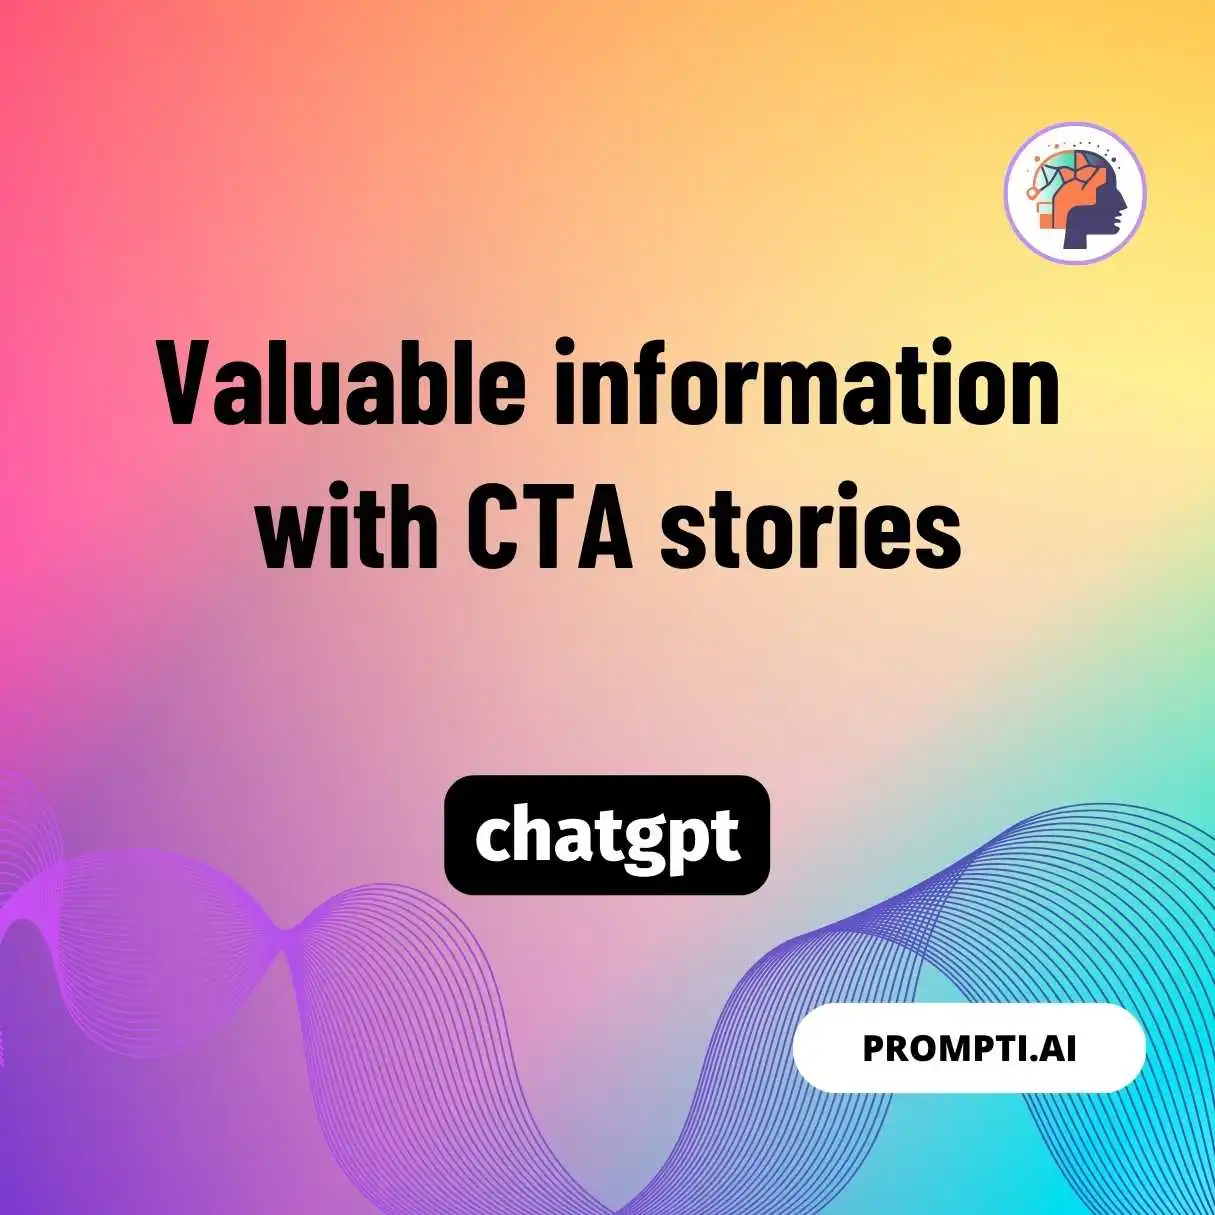 Valuable information with CTA stories